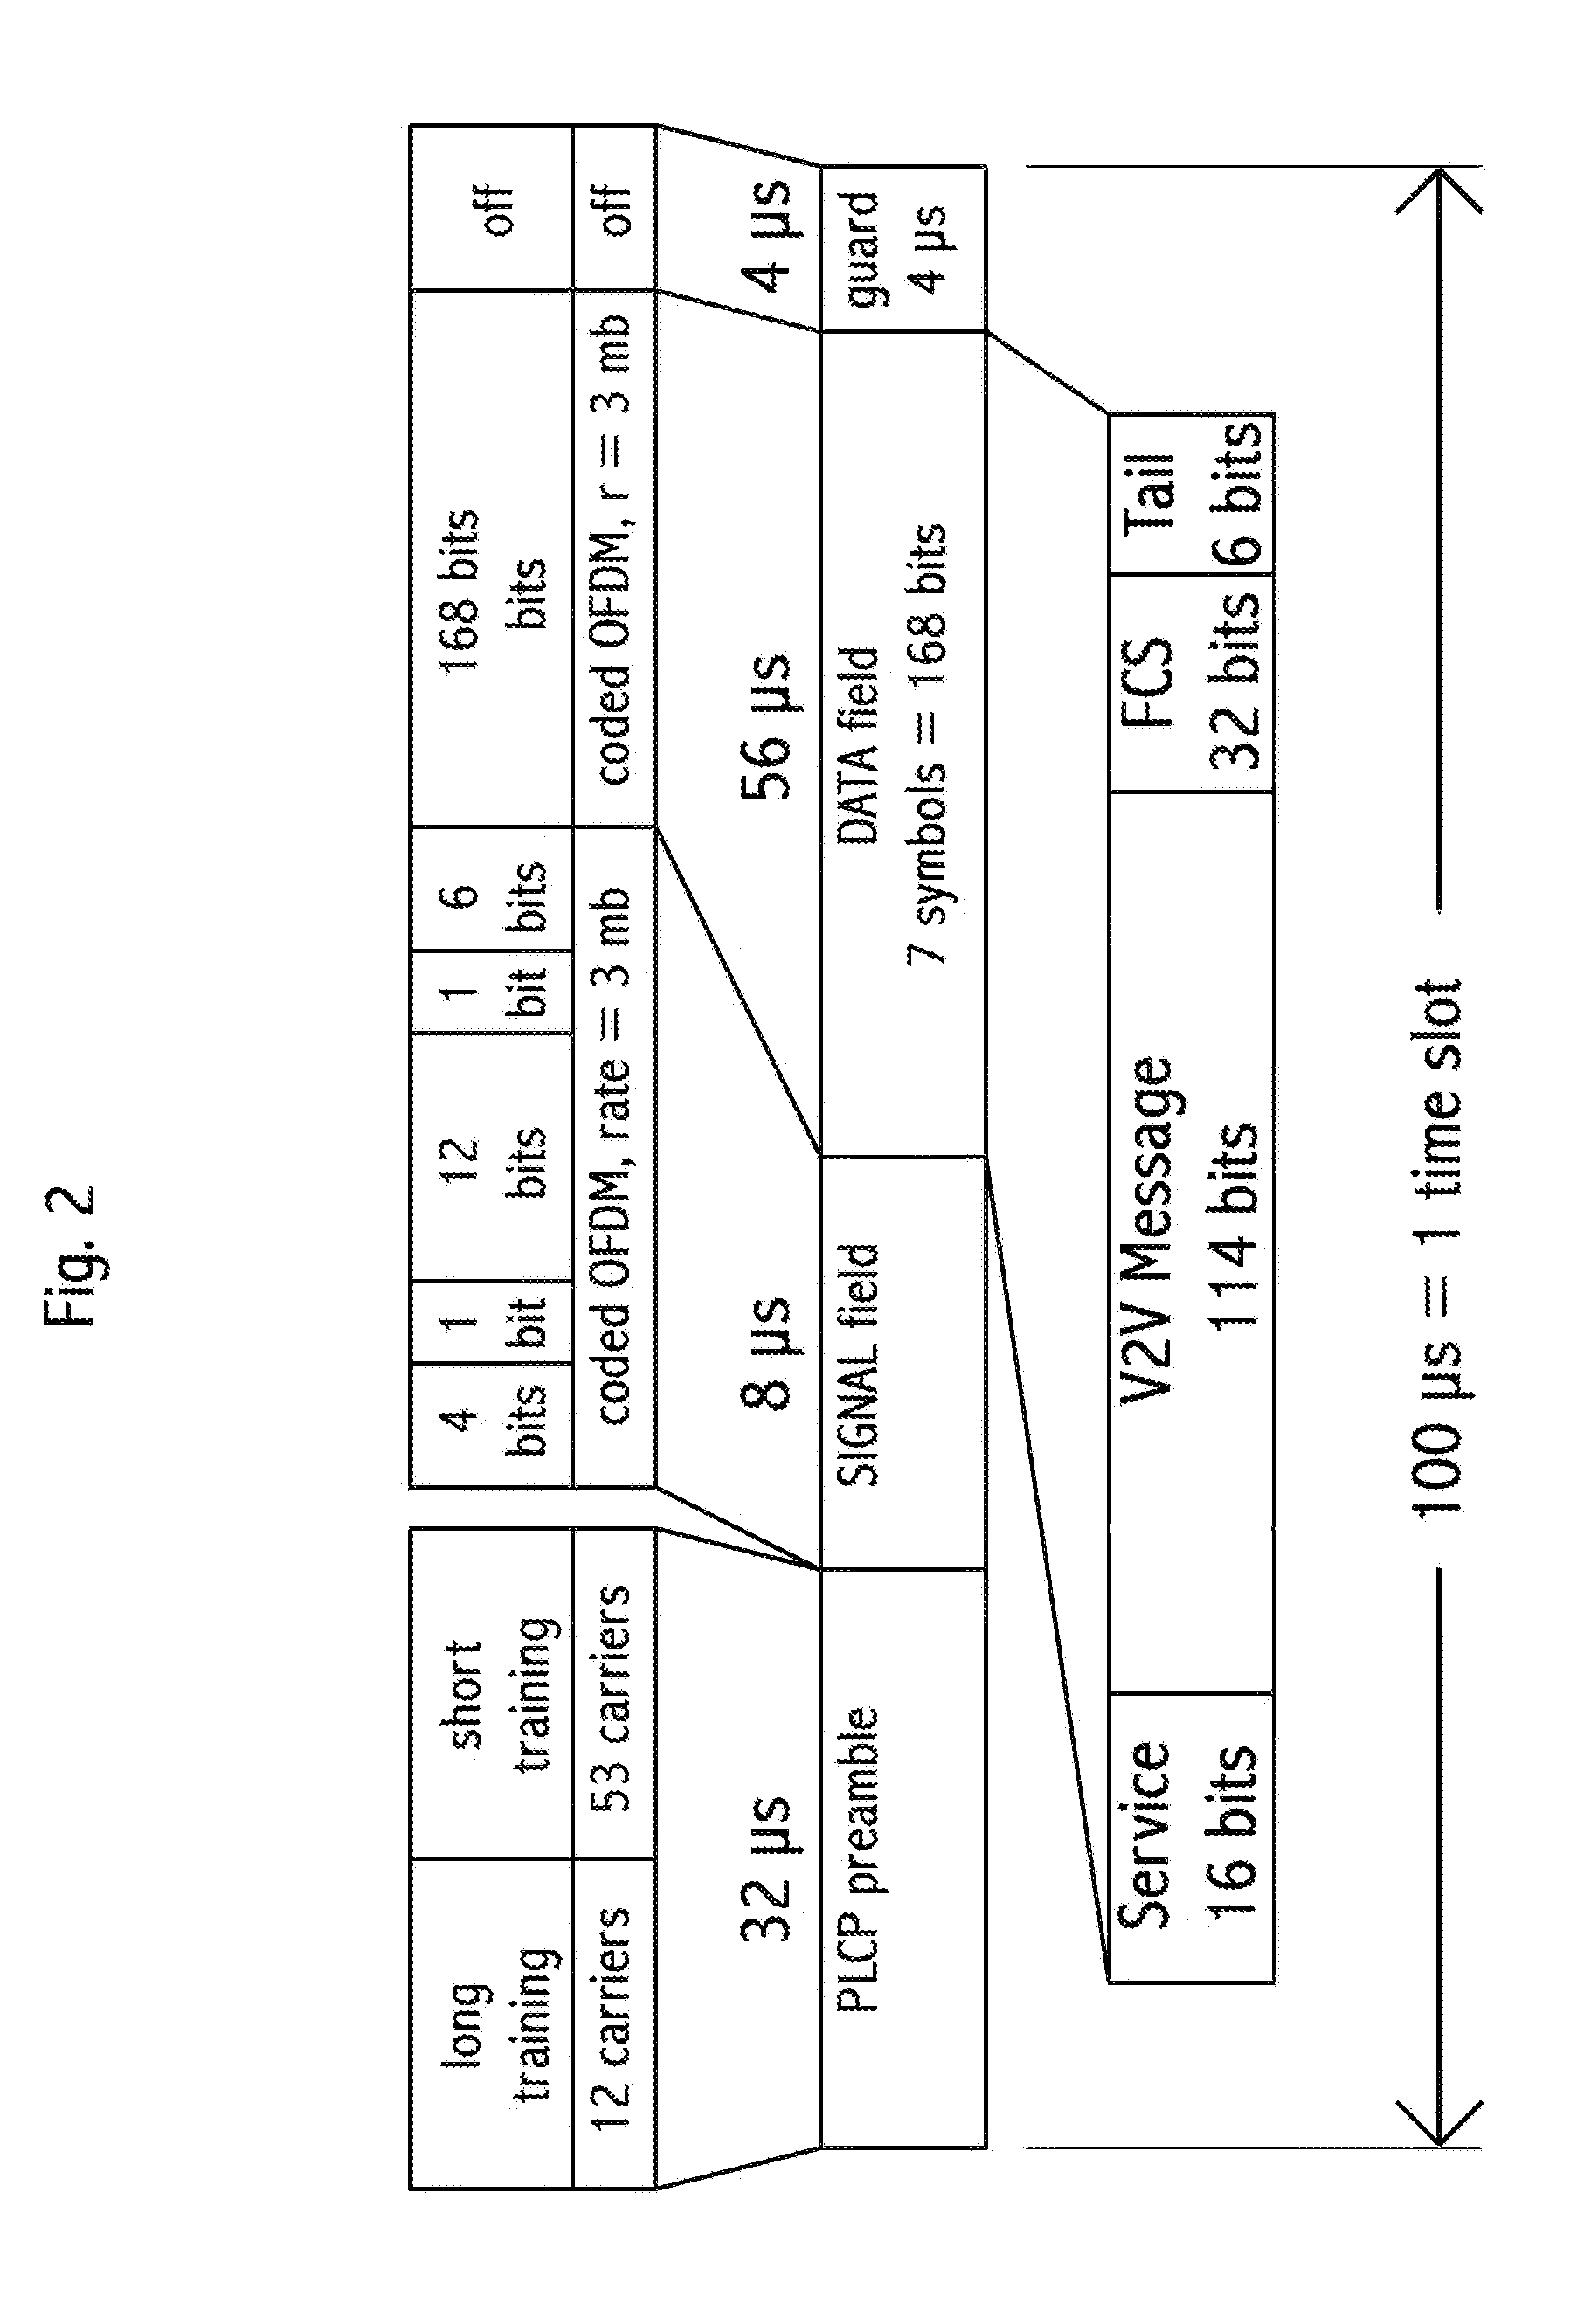 Vehicle-to-vehicle Anti-collision system and method using power levels